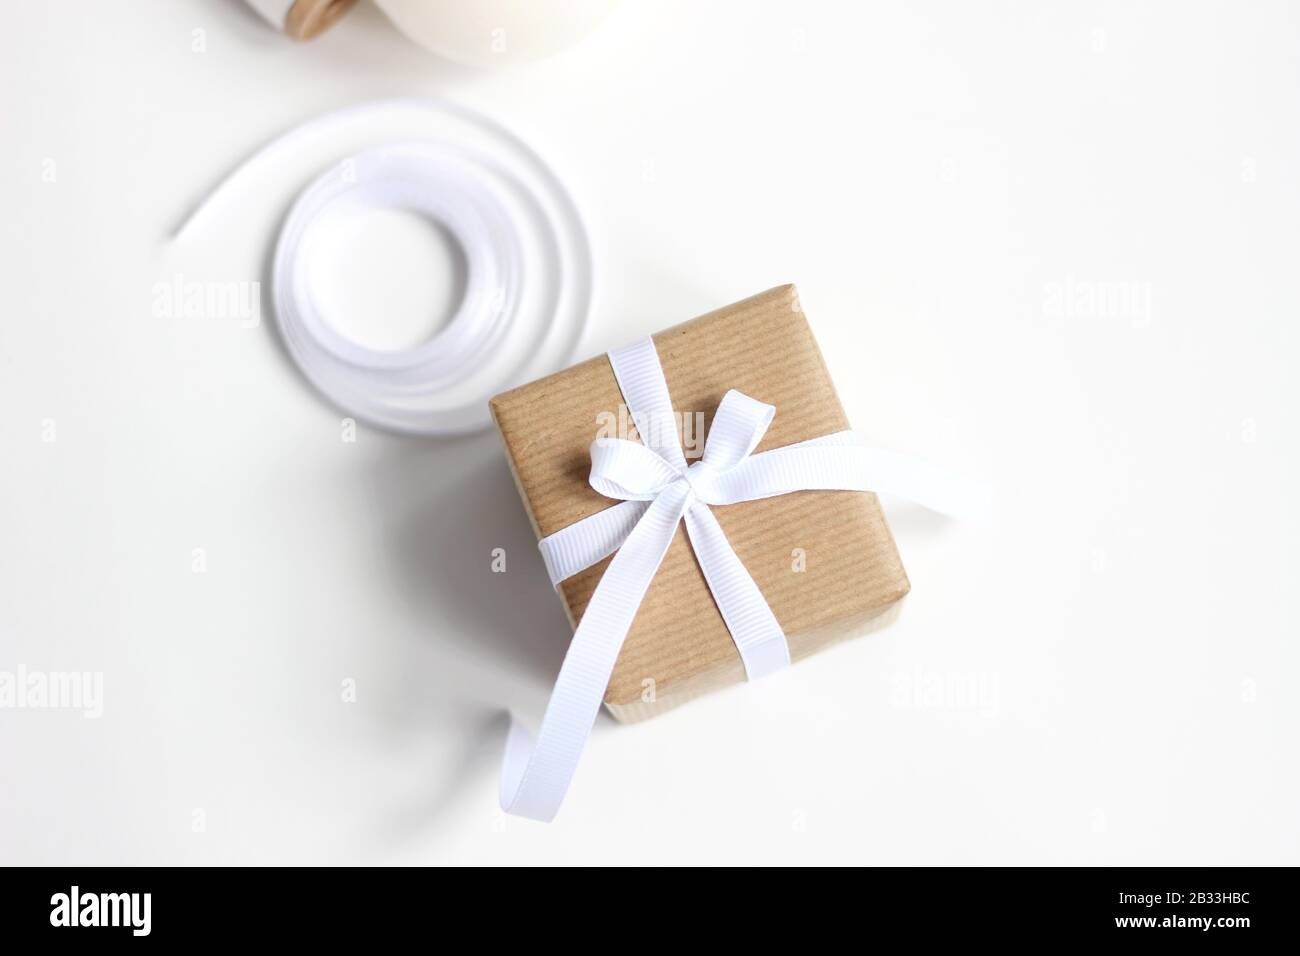 Holiday Gift. Christmas and New Year Still Life Composition in White and Beige Colors. Stock Photo